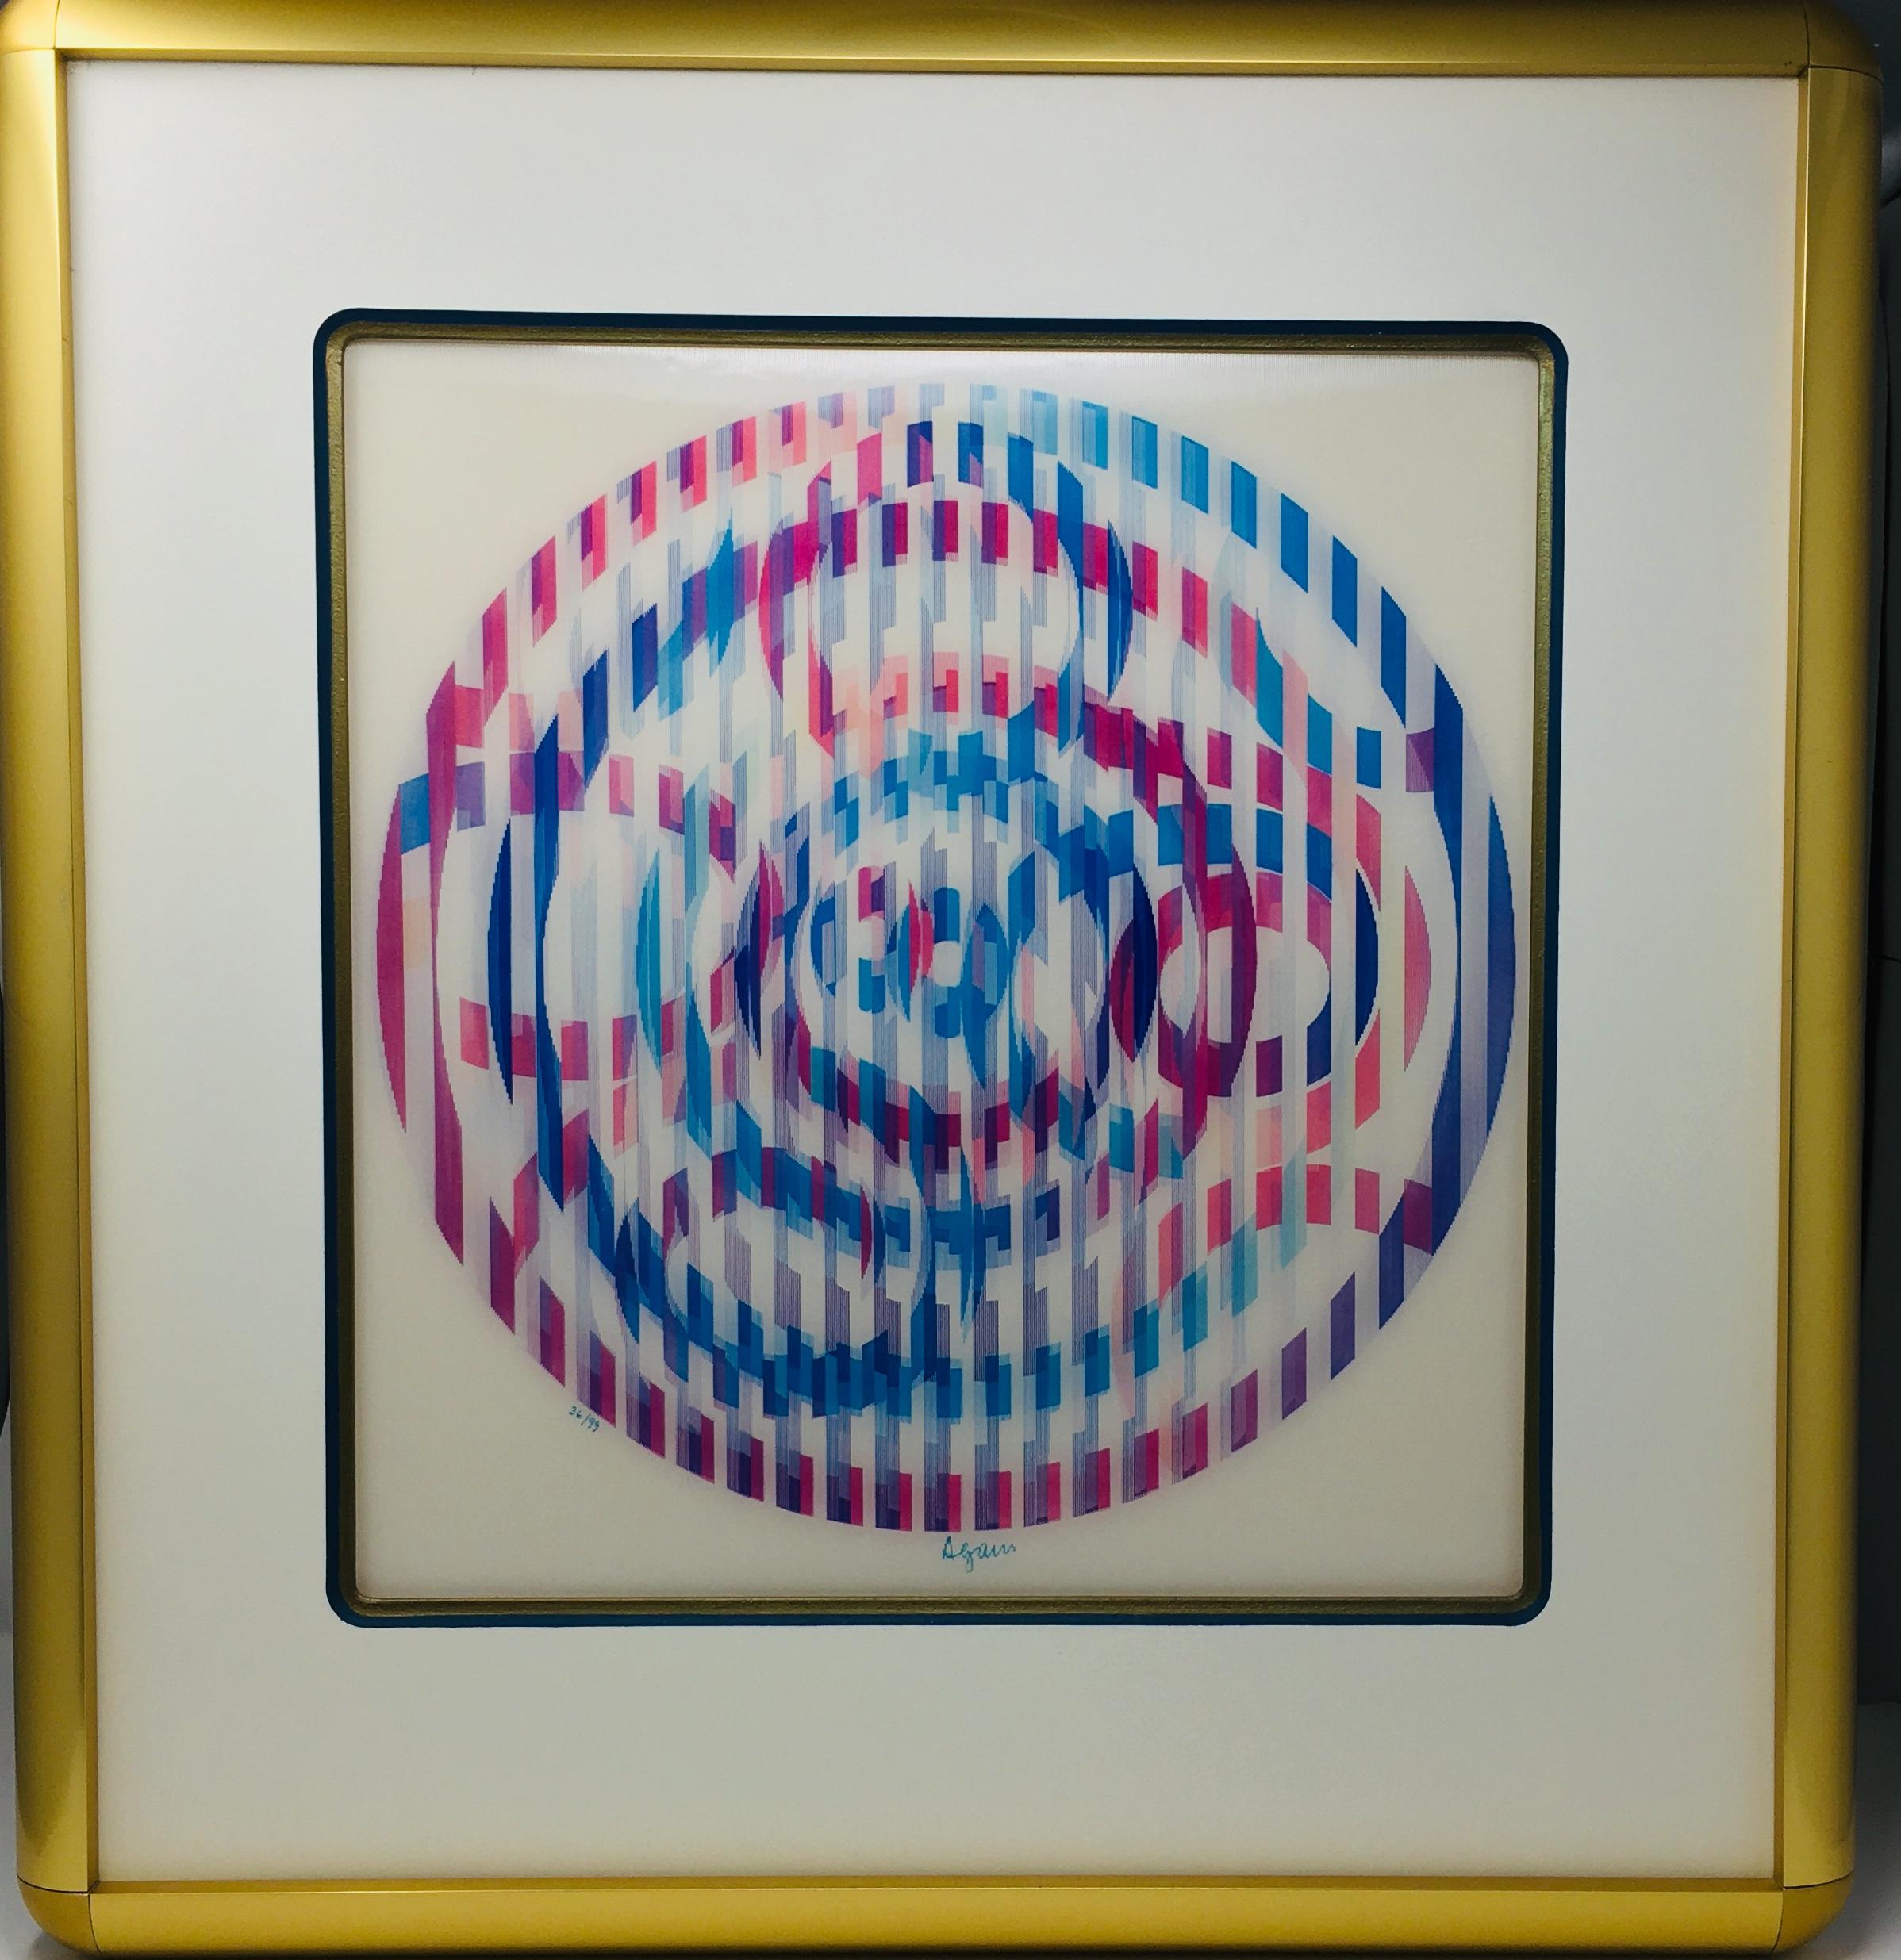 Yaacov Agam (Israeli, born 1928)
Untitled
Agamograph (lenticular/kinetic print)
Signed lower right
Edition 33/99
Sight: 15in H x  x 141/4in L 
In a custom brass frame: 23 3/4in H x 22 1/2in. L 

An agamograph is an artwork that when viewed from